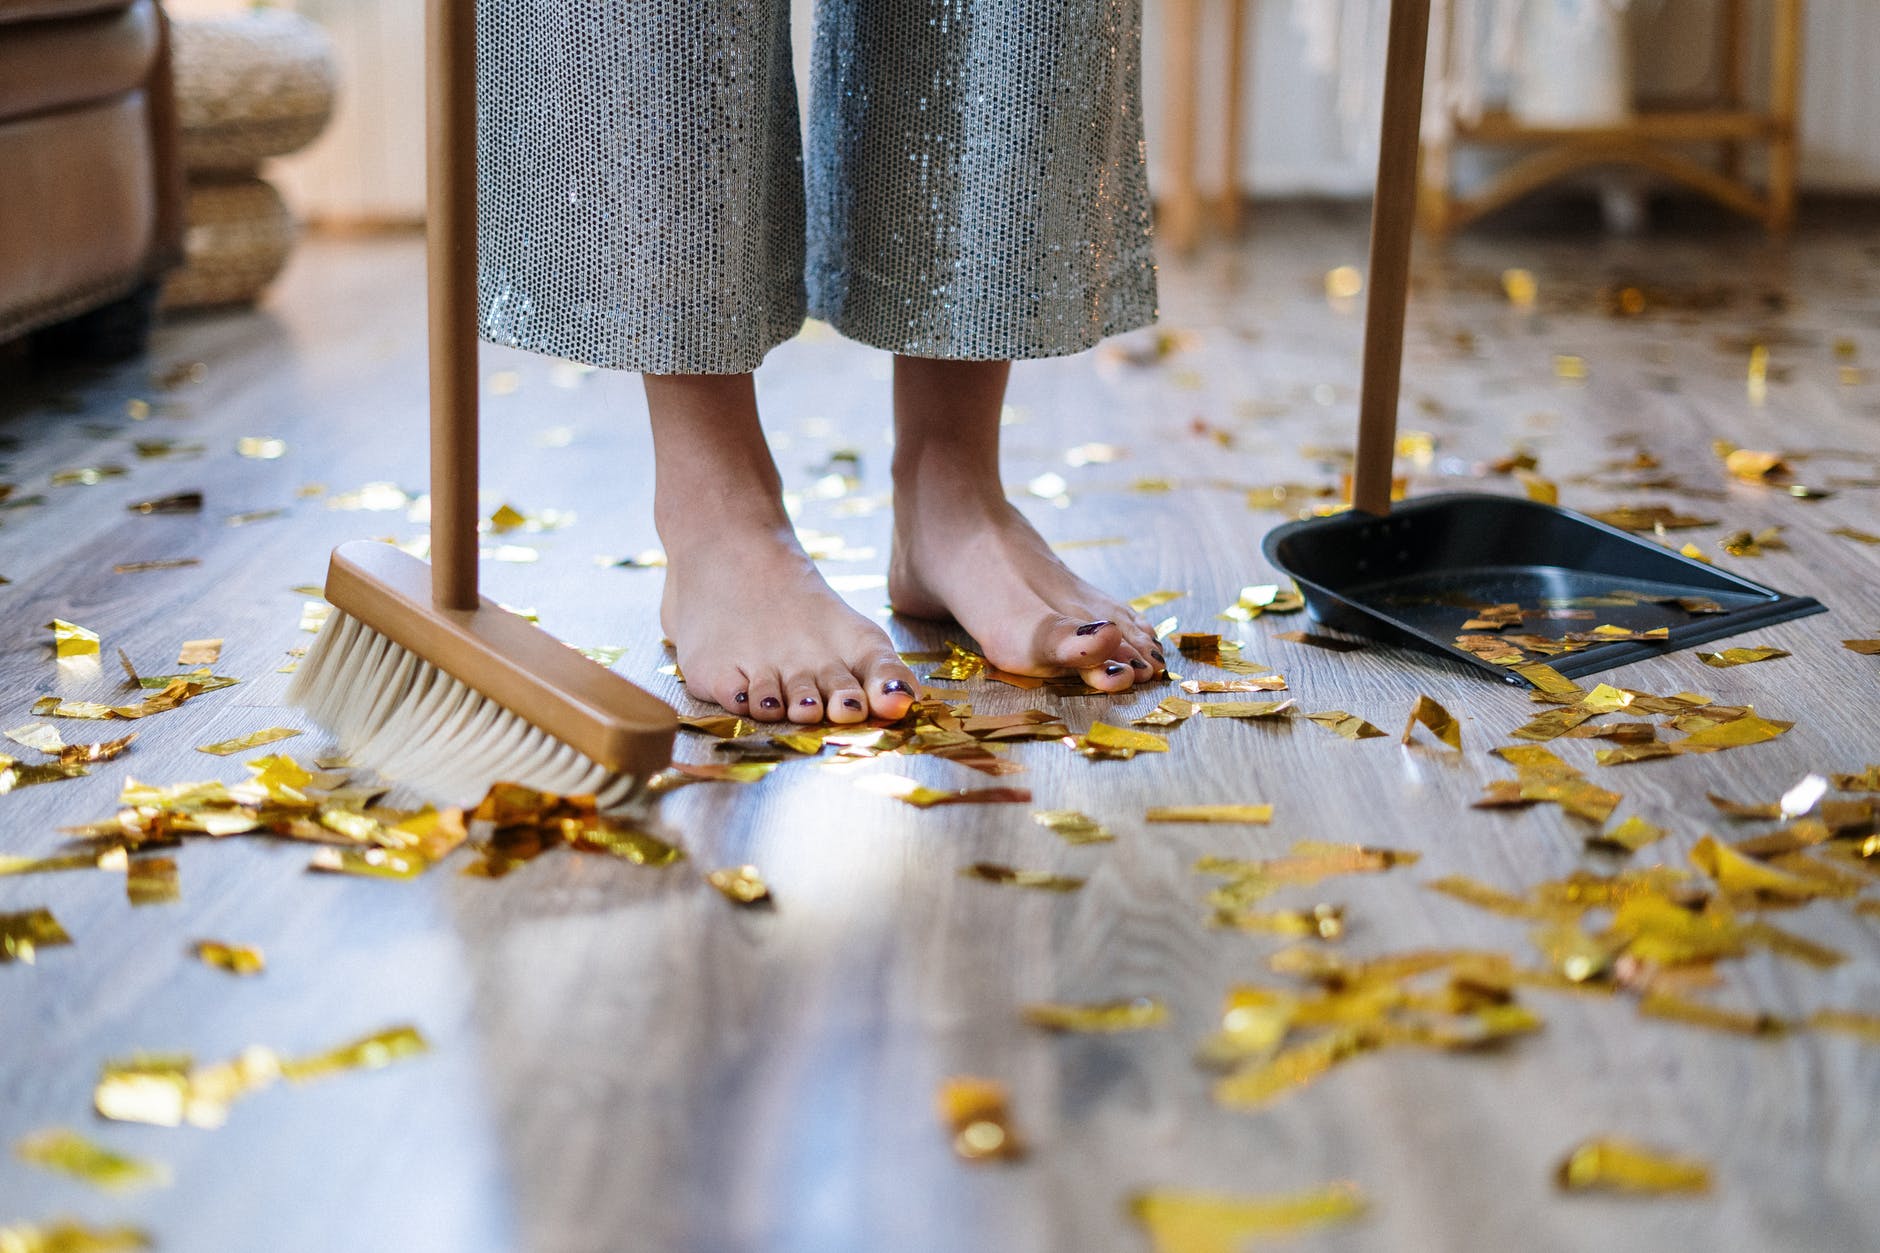 Lydia was mostly ignored by her parents until it was time to get the house chores done | Source: Pexels